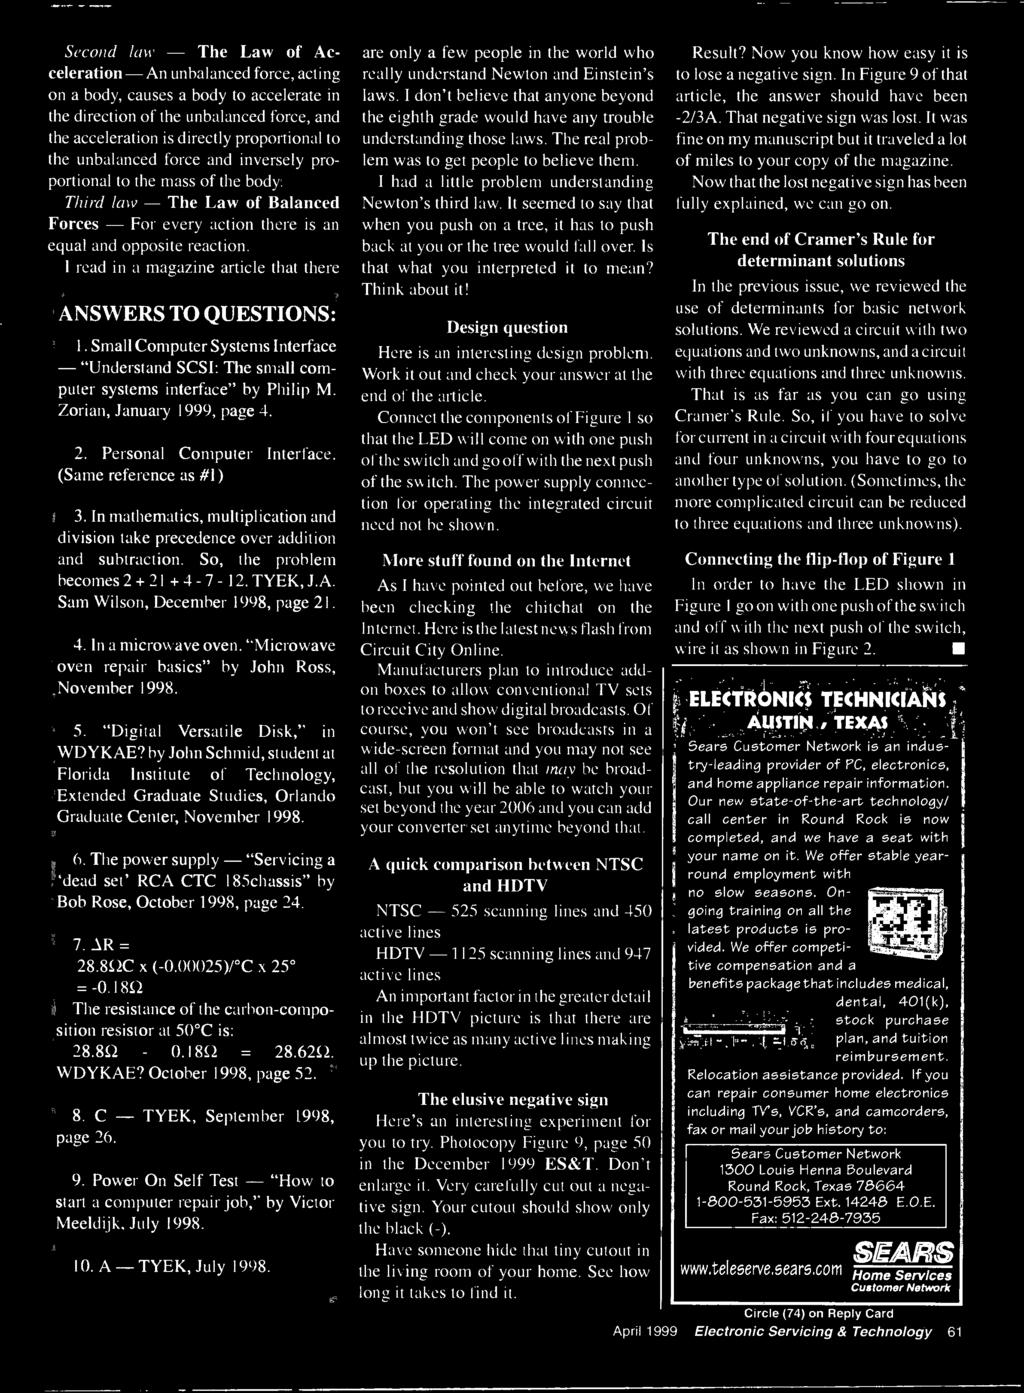 read in a magazine article that there ANSWERS TO QUESTONS: 1. Small Computer Systems nterface - "Understand SCS: The small computer systems interface" by Philip M. Zorian, January 1999, page 4. 2.